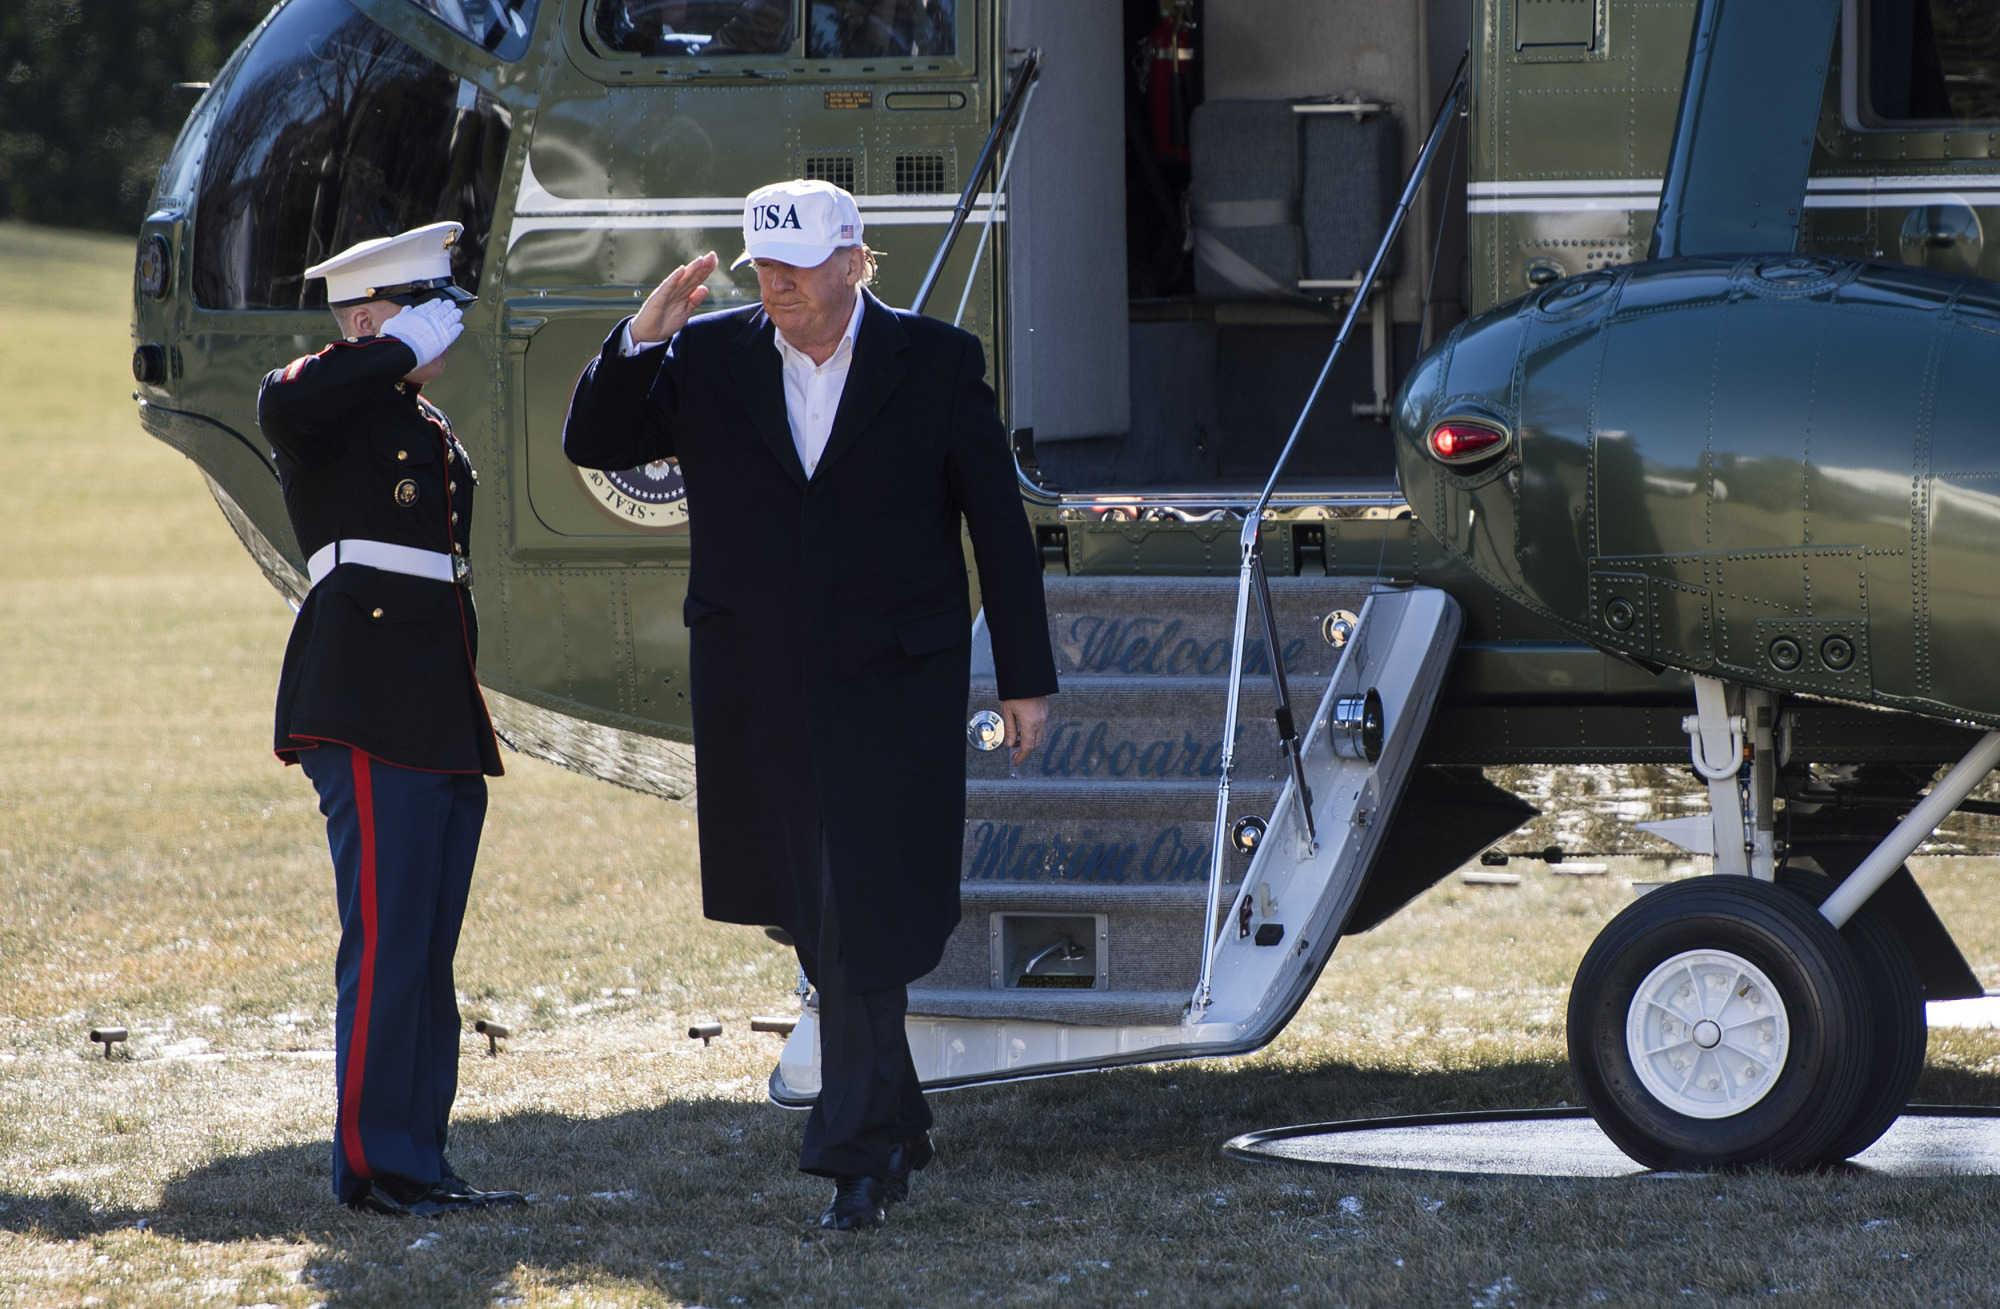 U.S. President Donald Trump salutes while disembarking from Marine One after a weekend trip with Republican leadership to Camp David, on the South Lawn of the White House in Washington Sunday. | BLOOMBERG